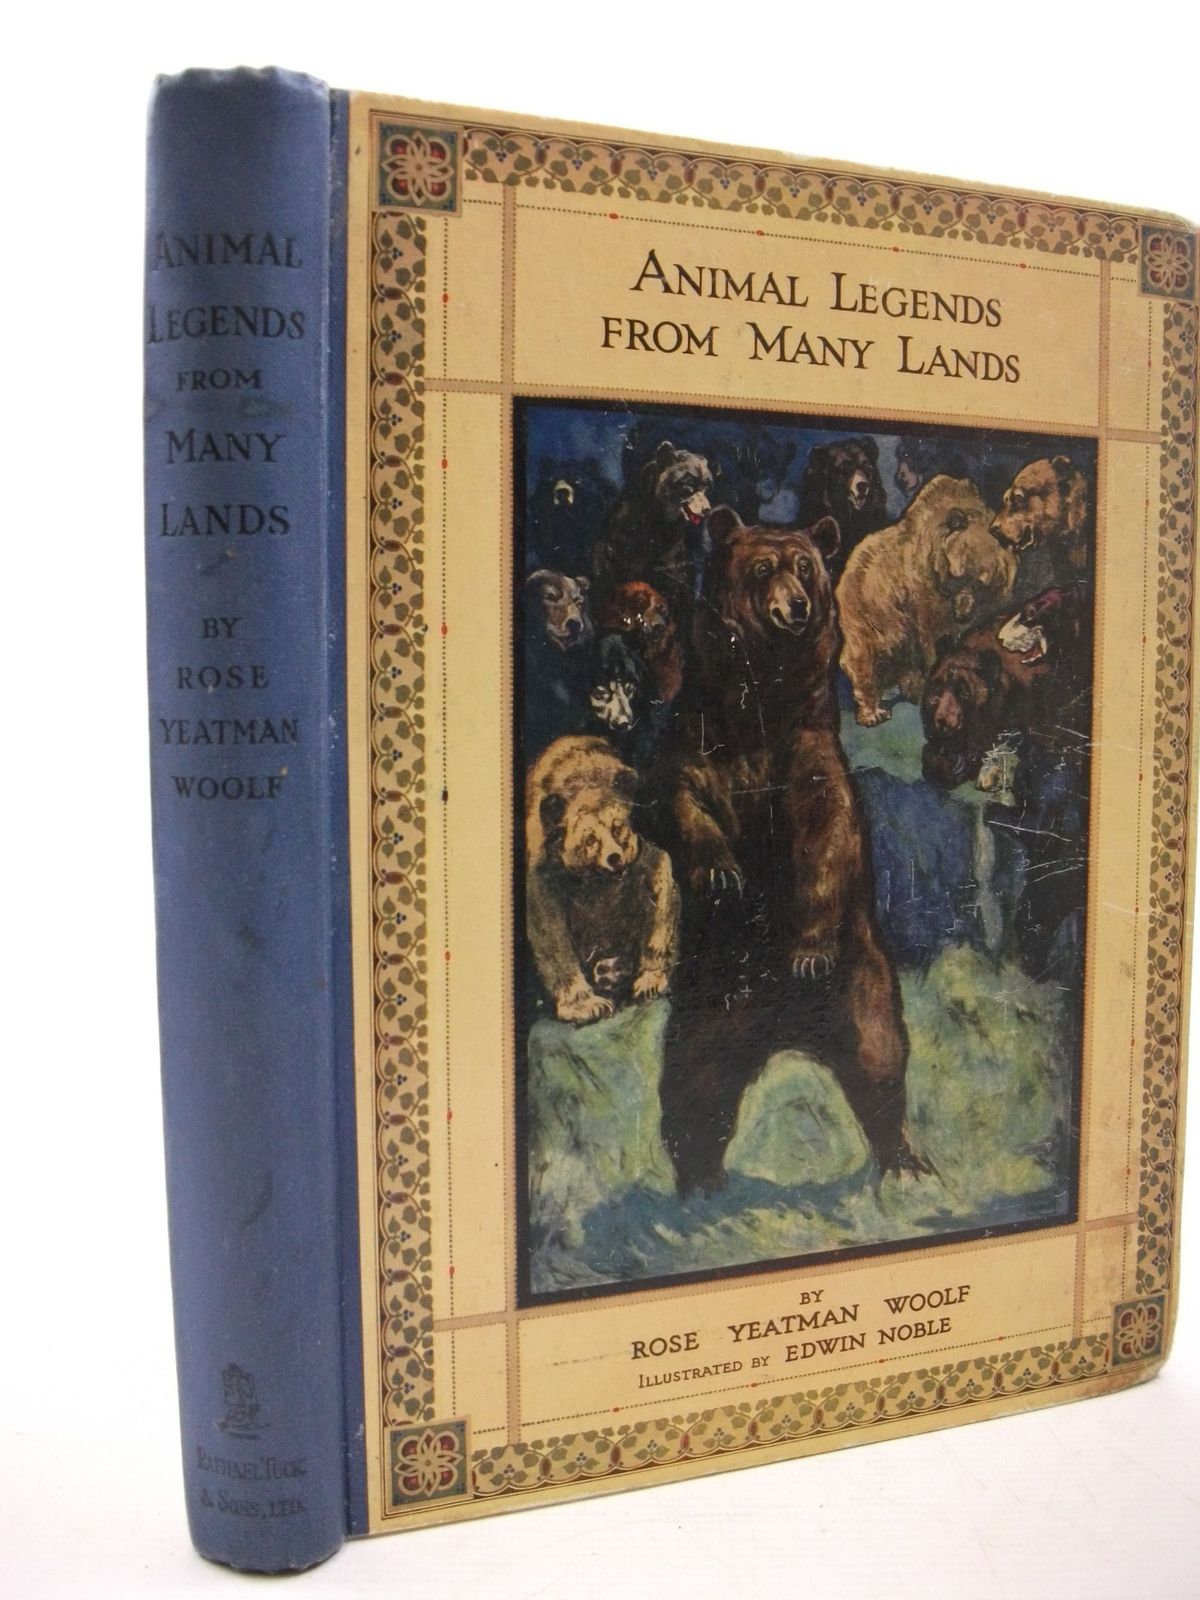 Cover of ANIMAL LEGENDS FROM MANY LANDS by Rose Yeatman Woolf